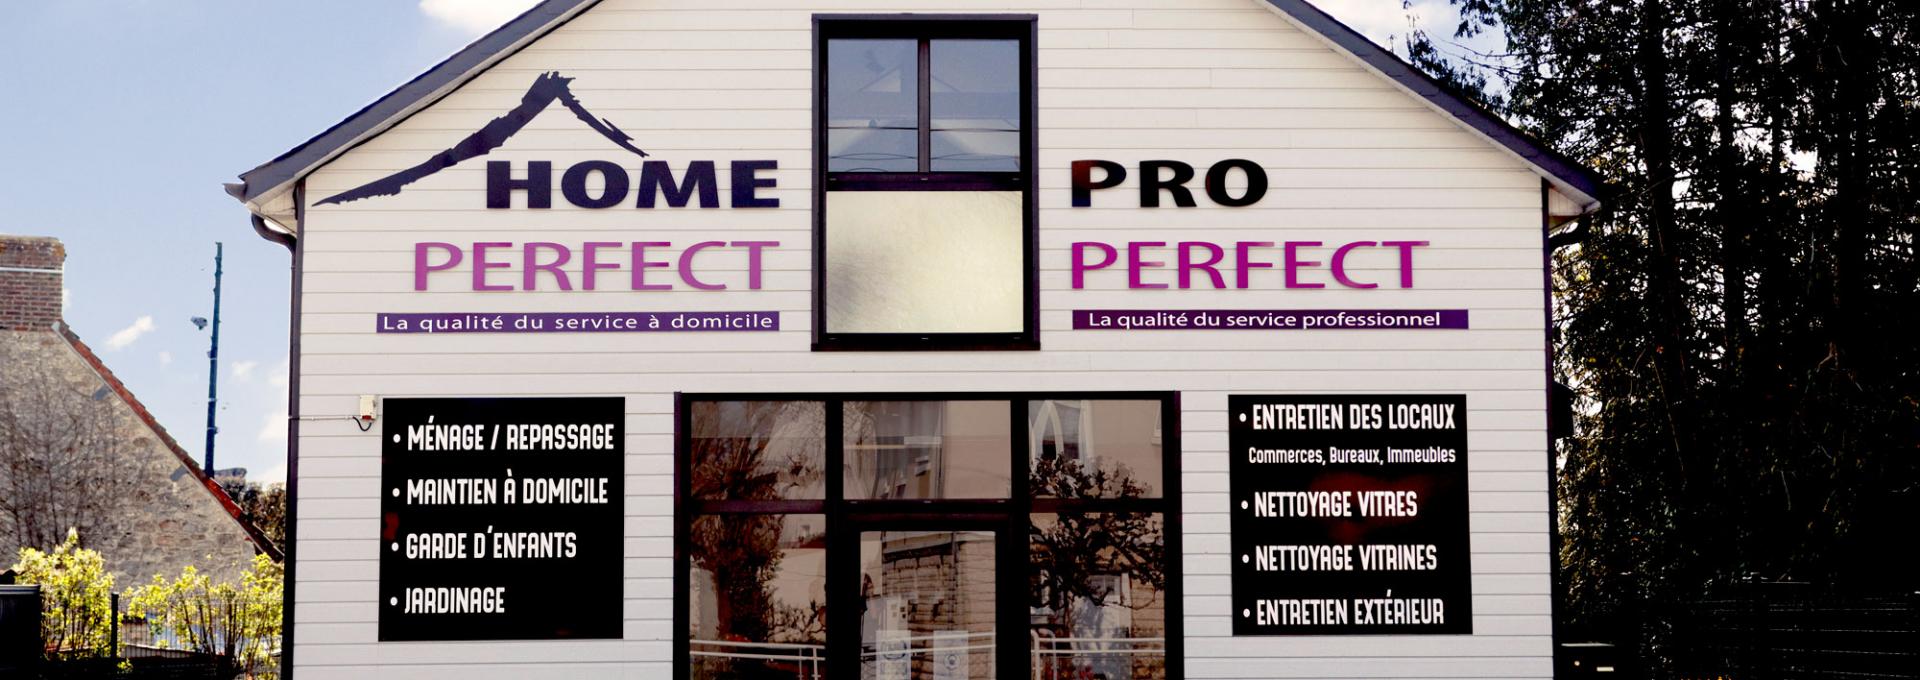 Image Home Perfect